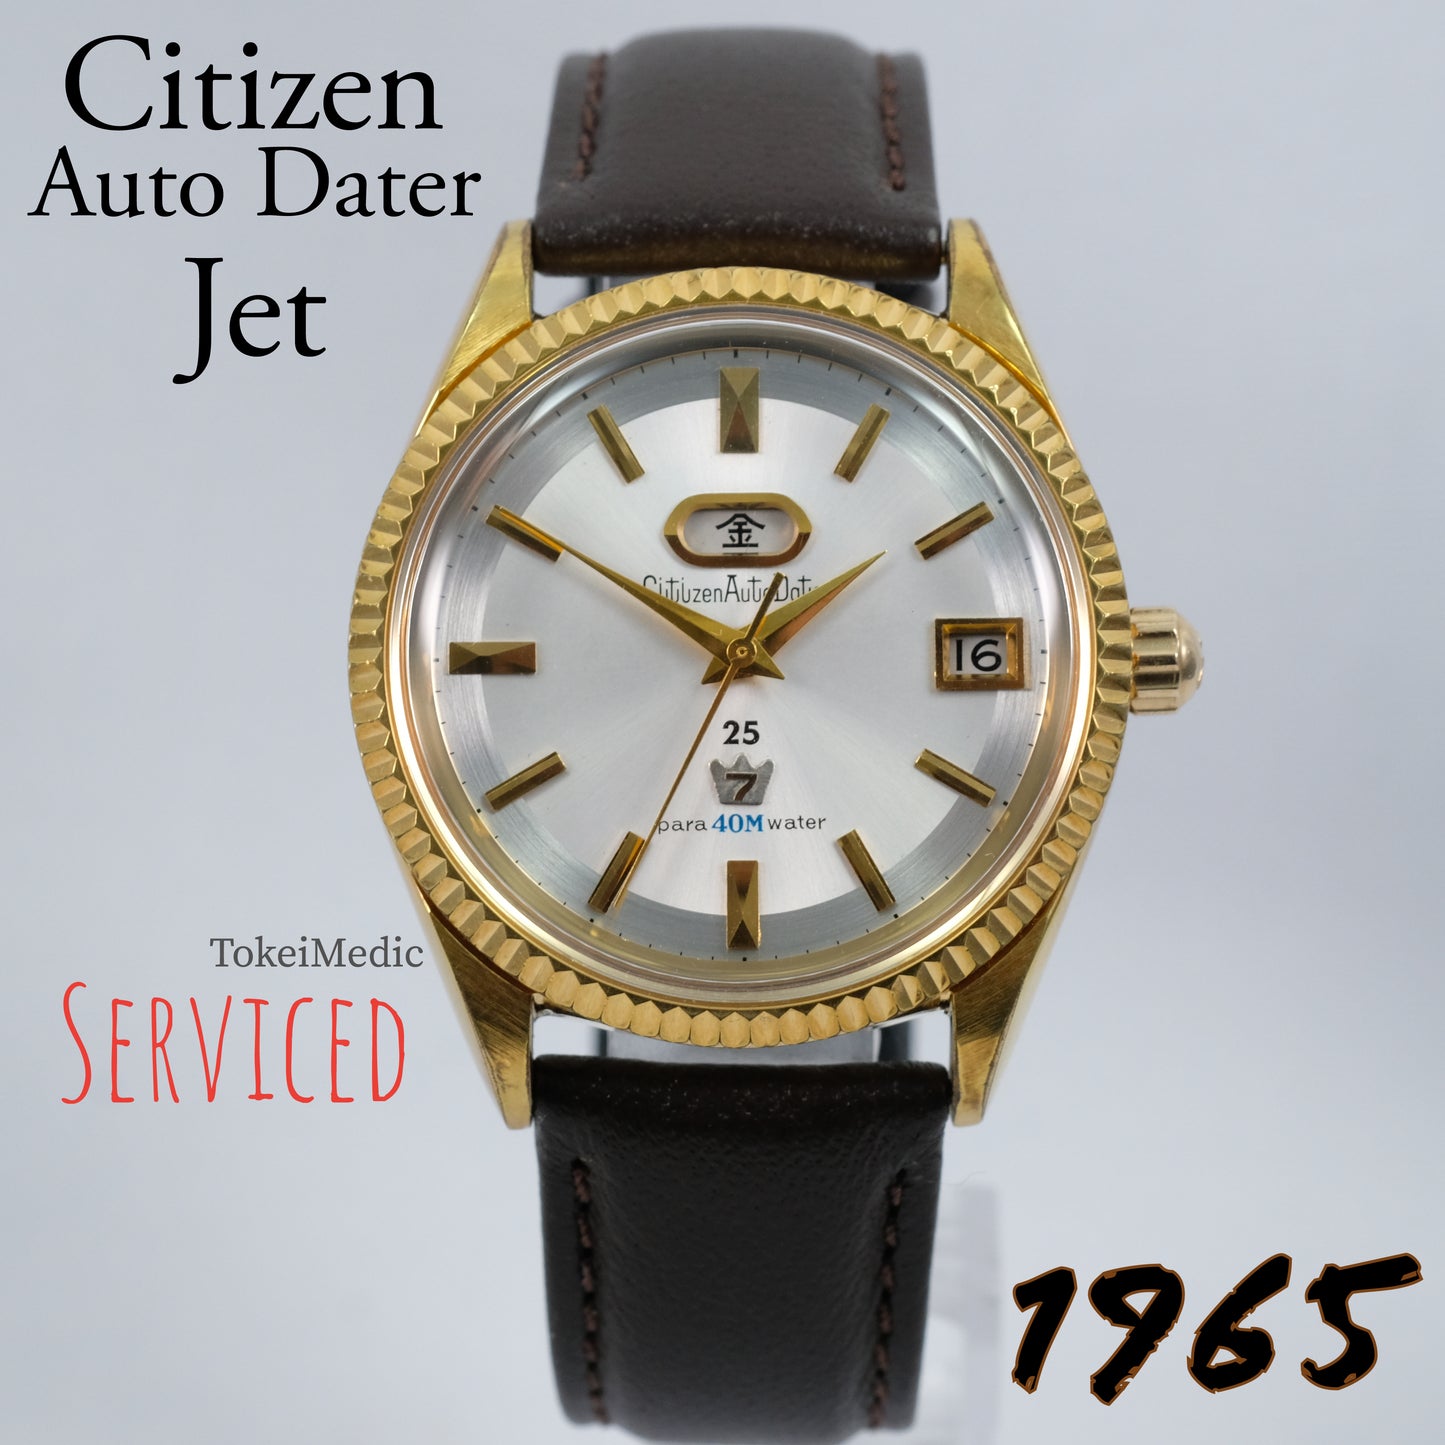 Reserved! Do not buy! 1965 Citizen Auto Dater Jet ADSG 51302-Y